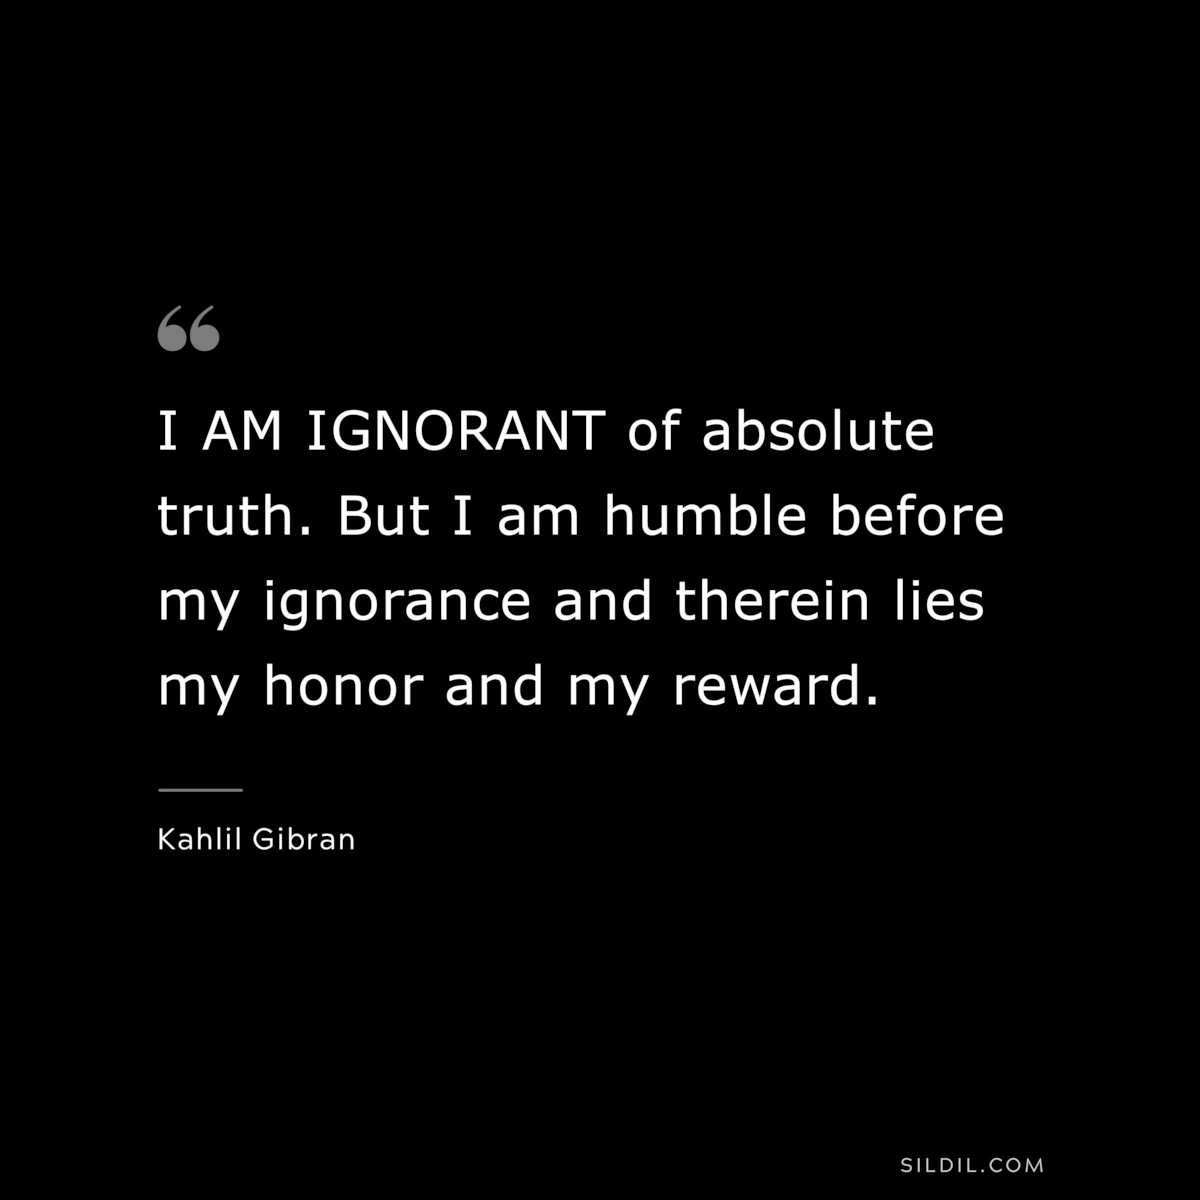 I AM IGNORANT of absolute truth. But I am humble before my ignorance and therein lies my honor and my reward. ― Kahlil Gibran